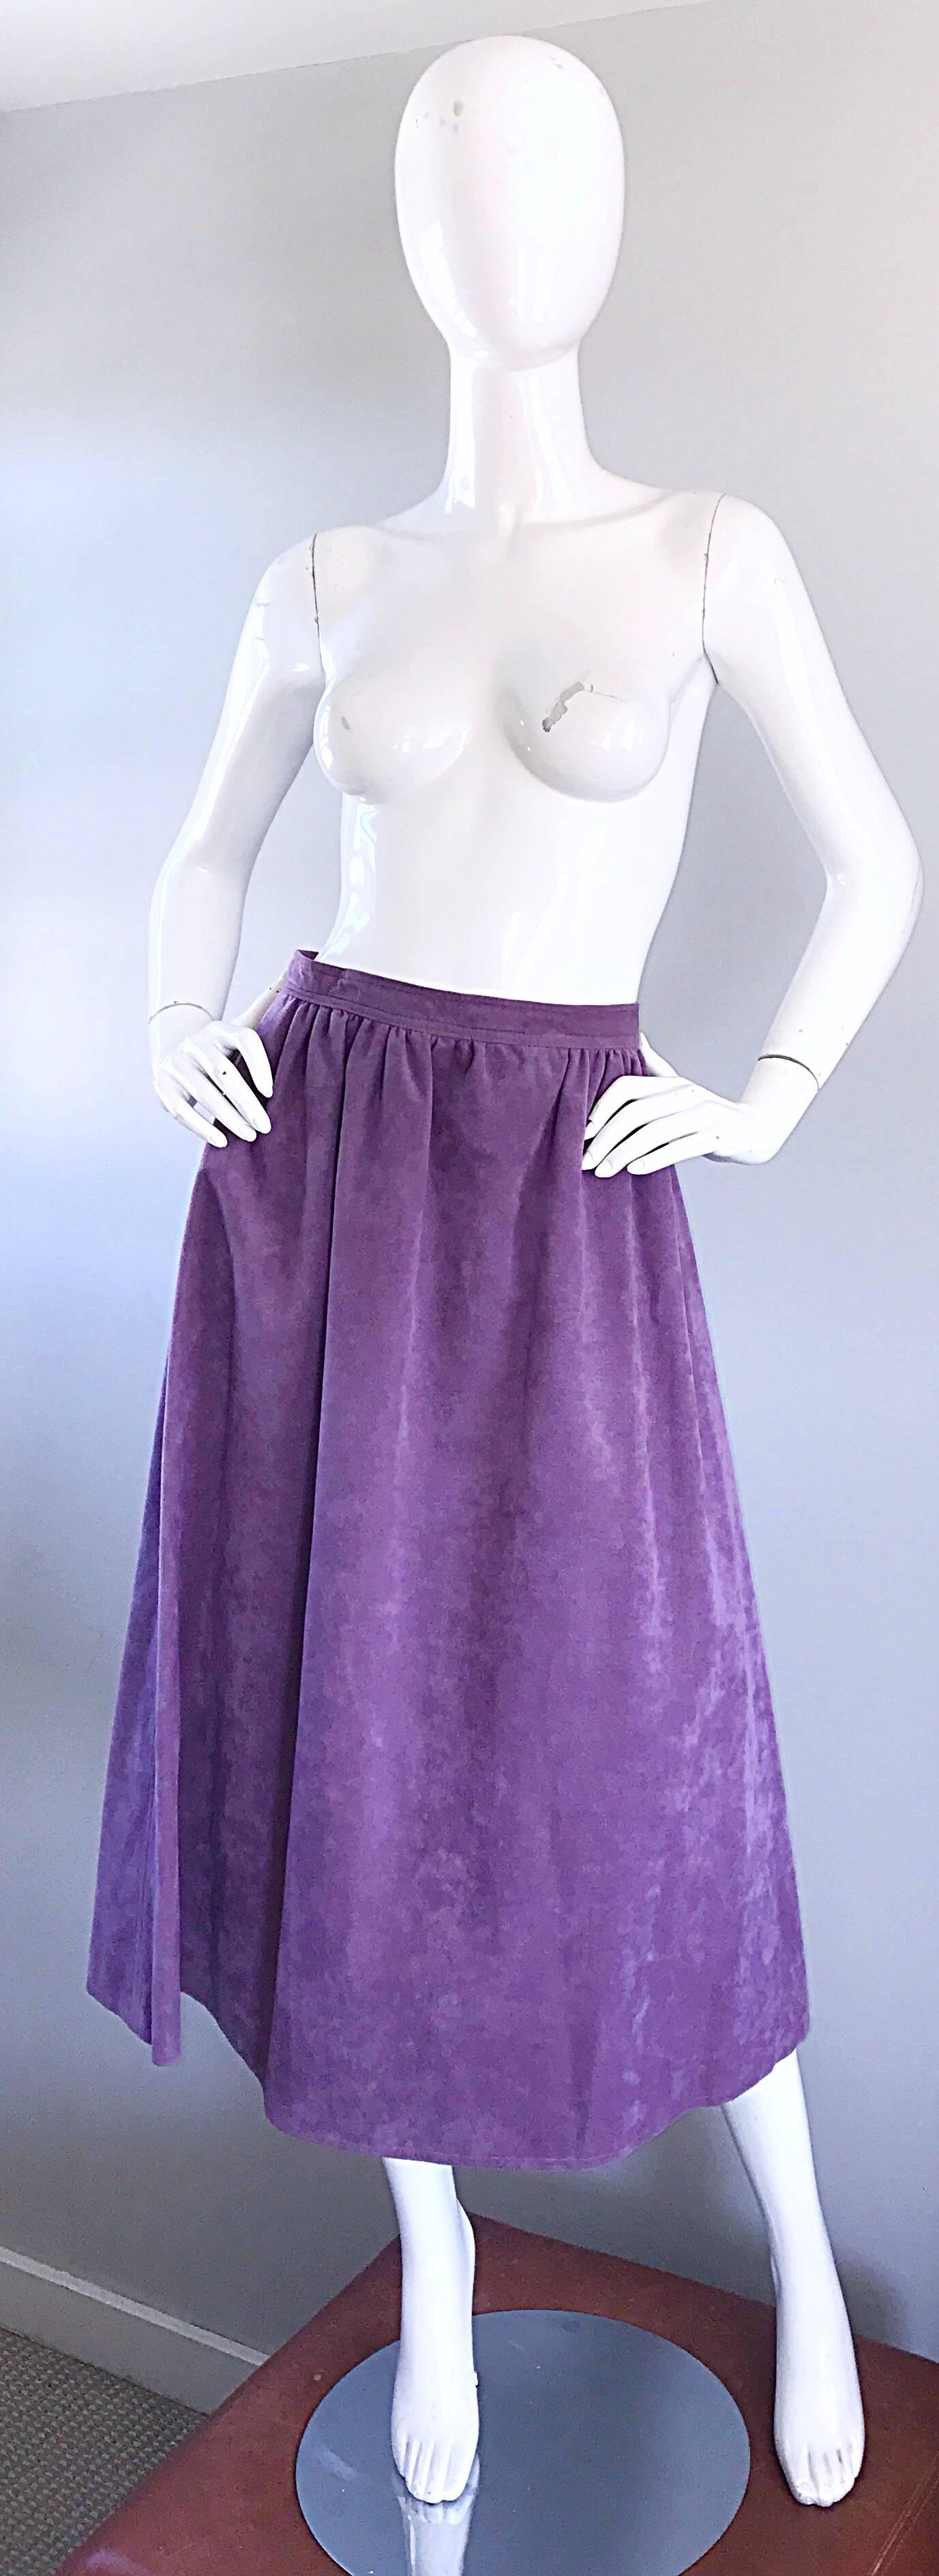 Beautiful vintage 1970s BILL BLASS ultra suede light purple / lilac A-Line midi skirt! Soft and durable ultra suede is great all year. Intricate pleating details at the waist. Hidden side metal zipper with two hook-and-eye closures to adjust size.